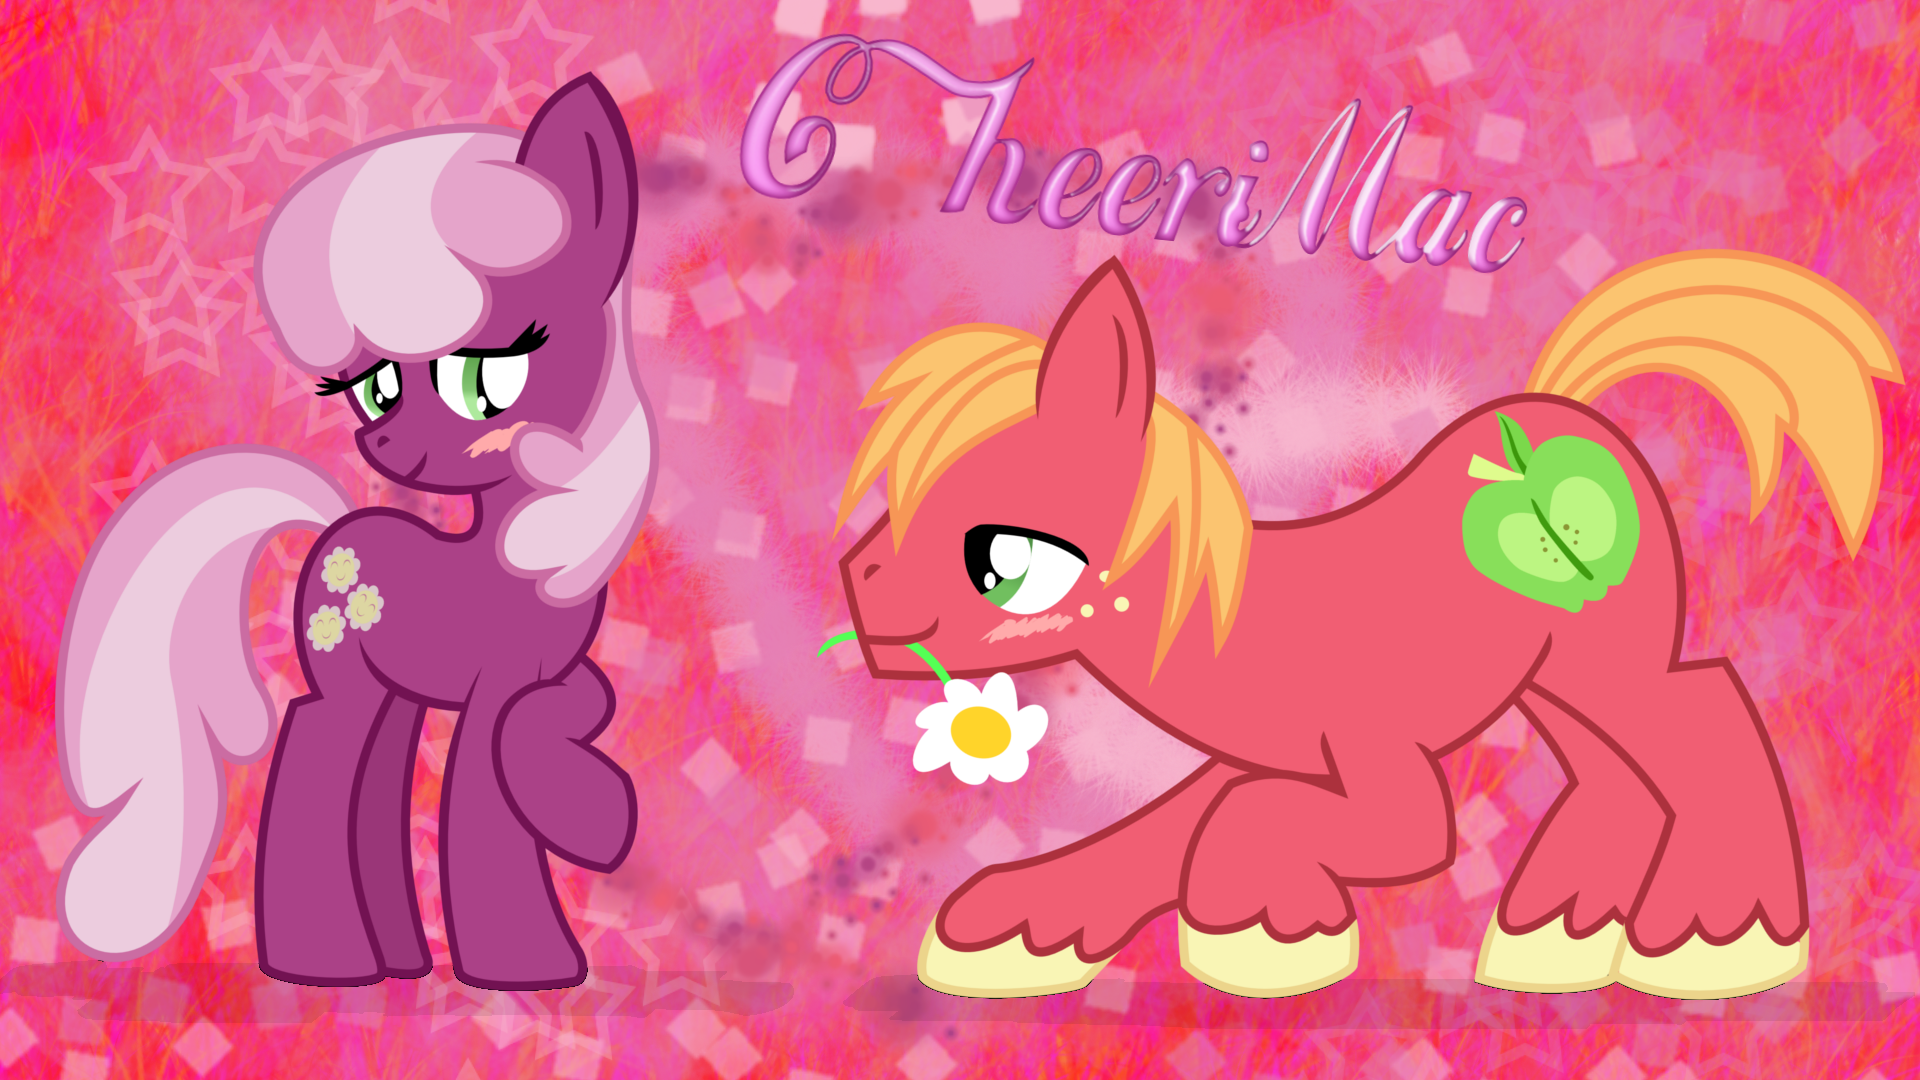 CheeriMac Wallpaper by Archonitianicsmasher and ChellyTheEevee